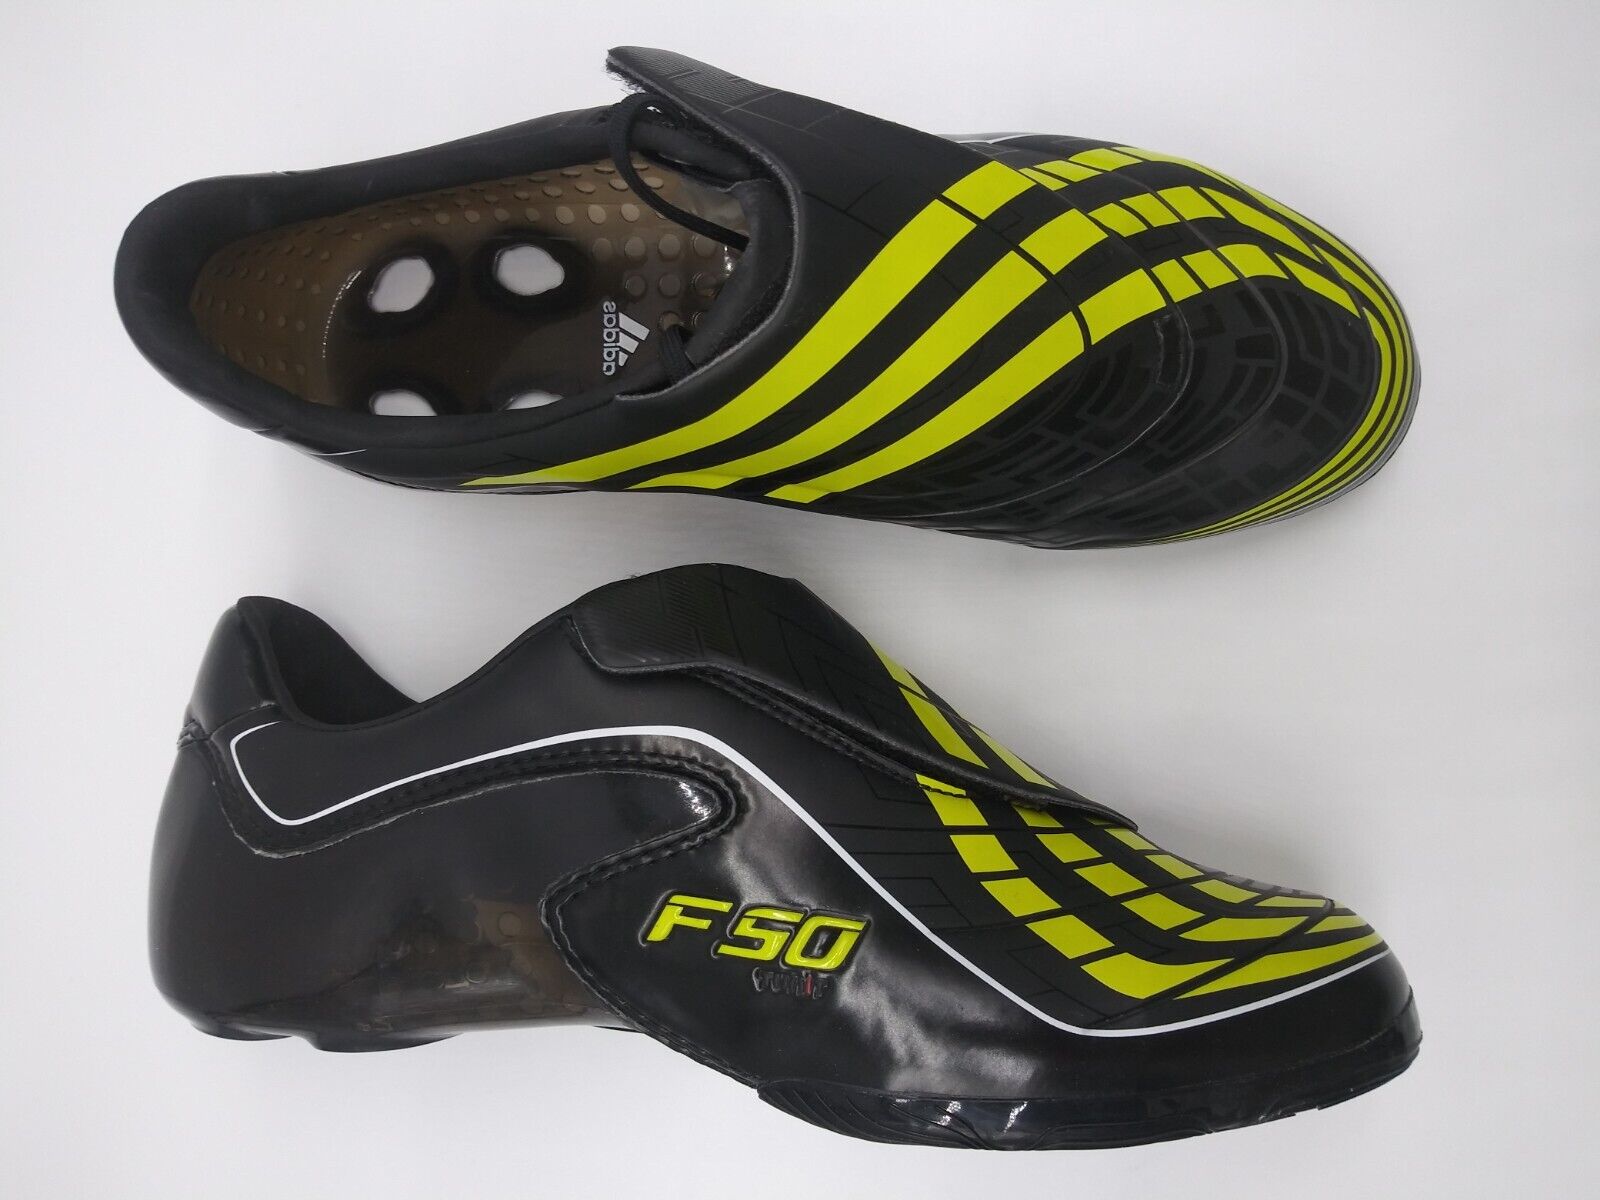 Adidas F50.9 Black Yellow(Skin and only,not Villegas Footwear